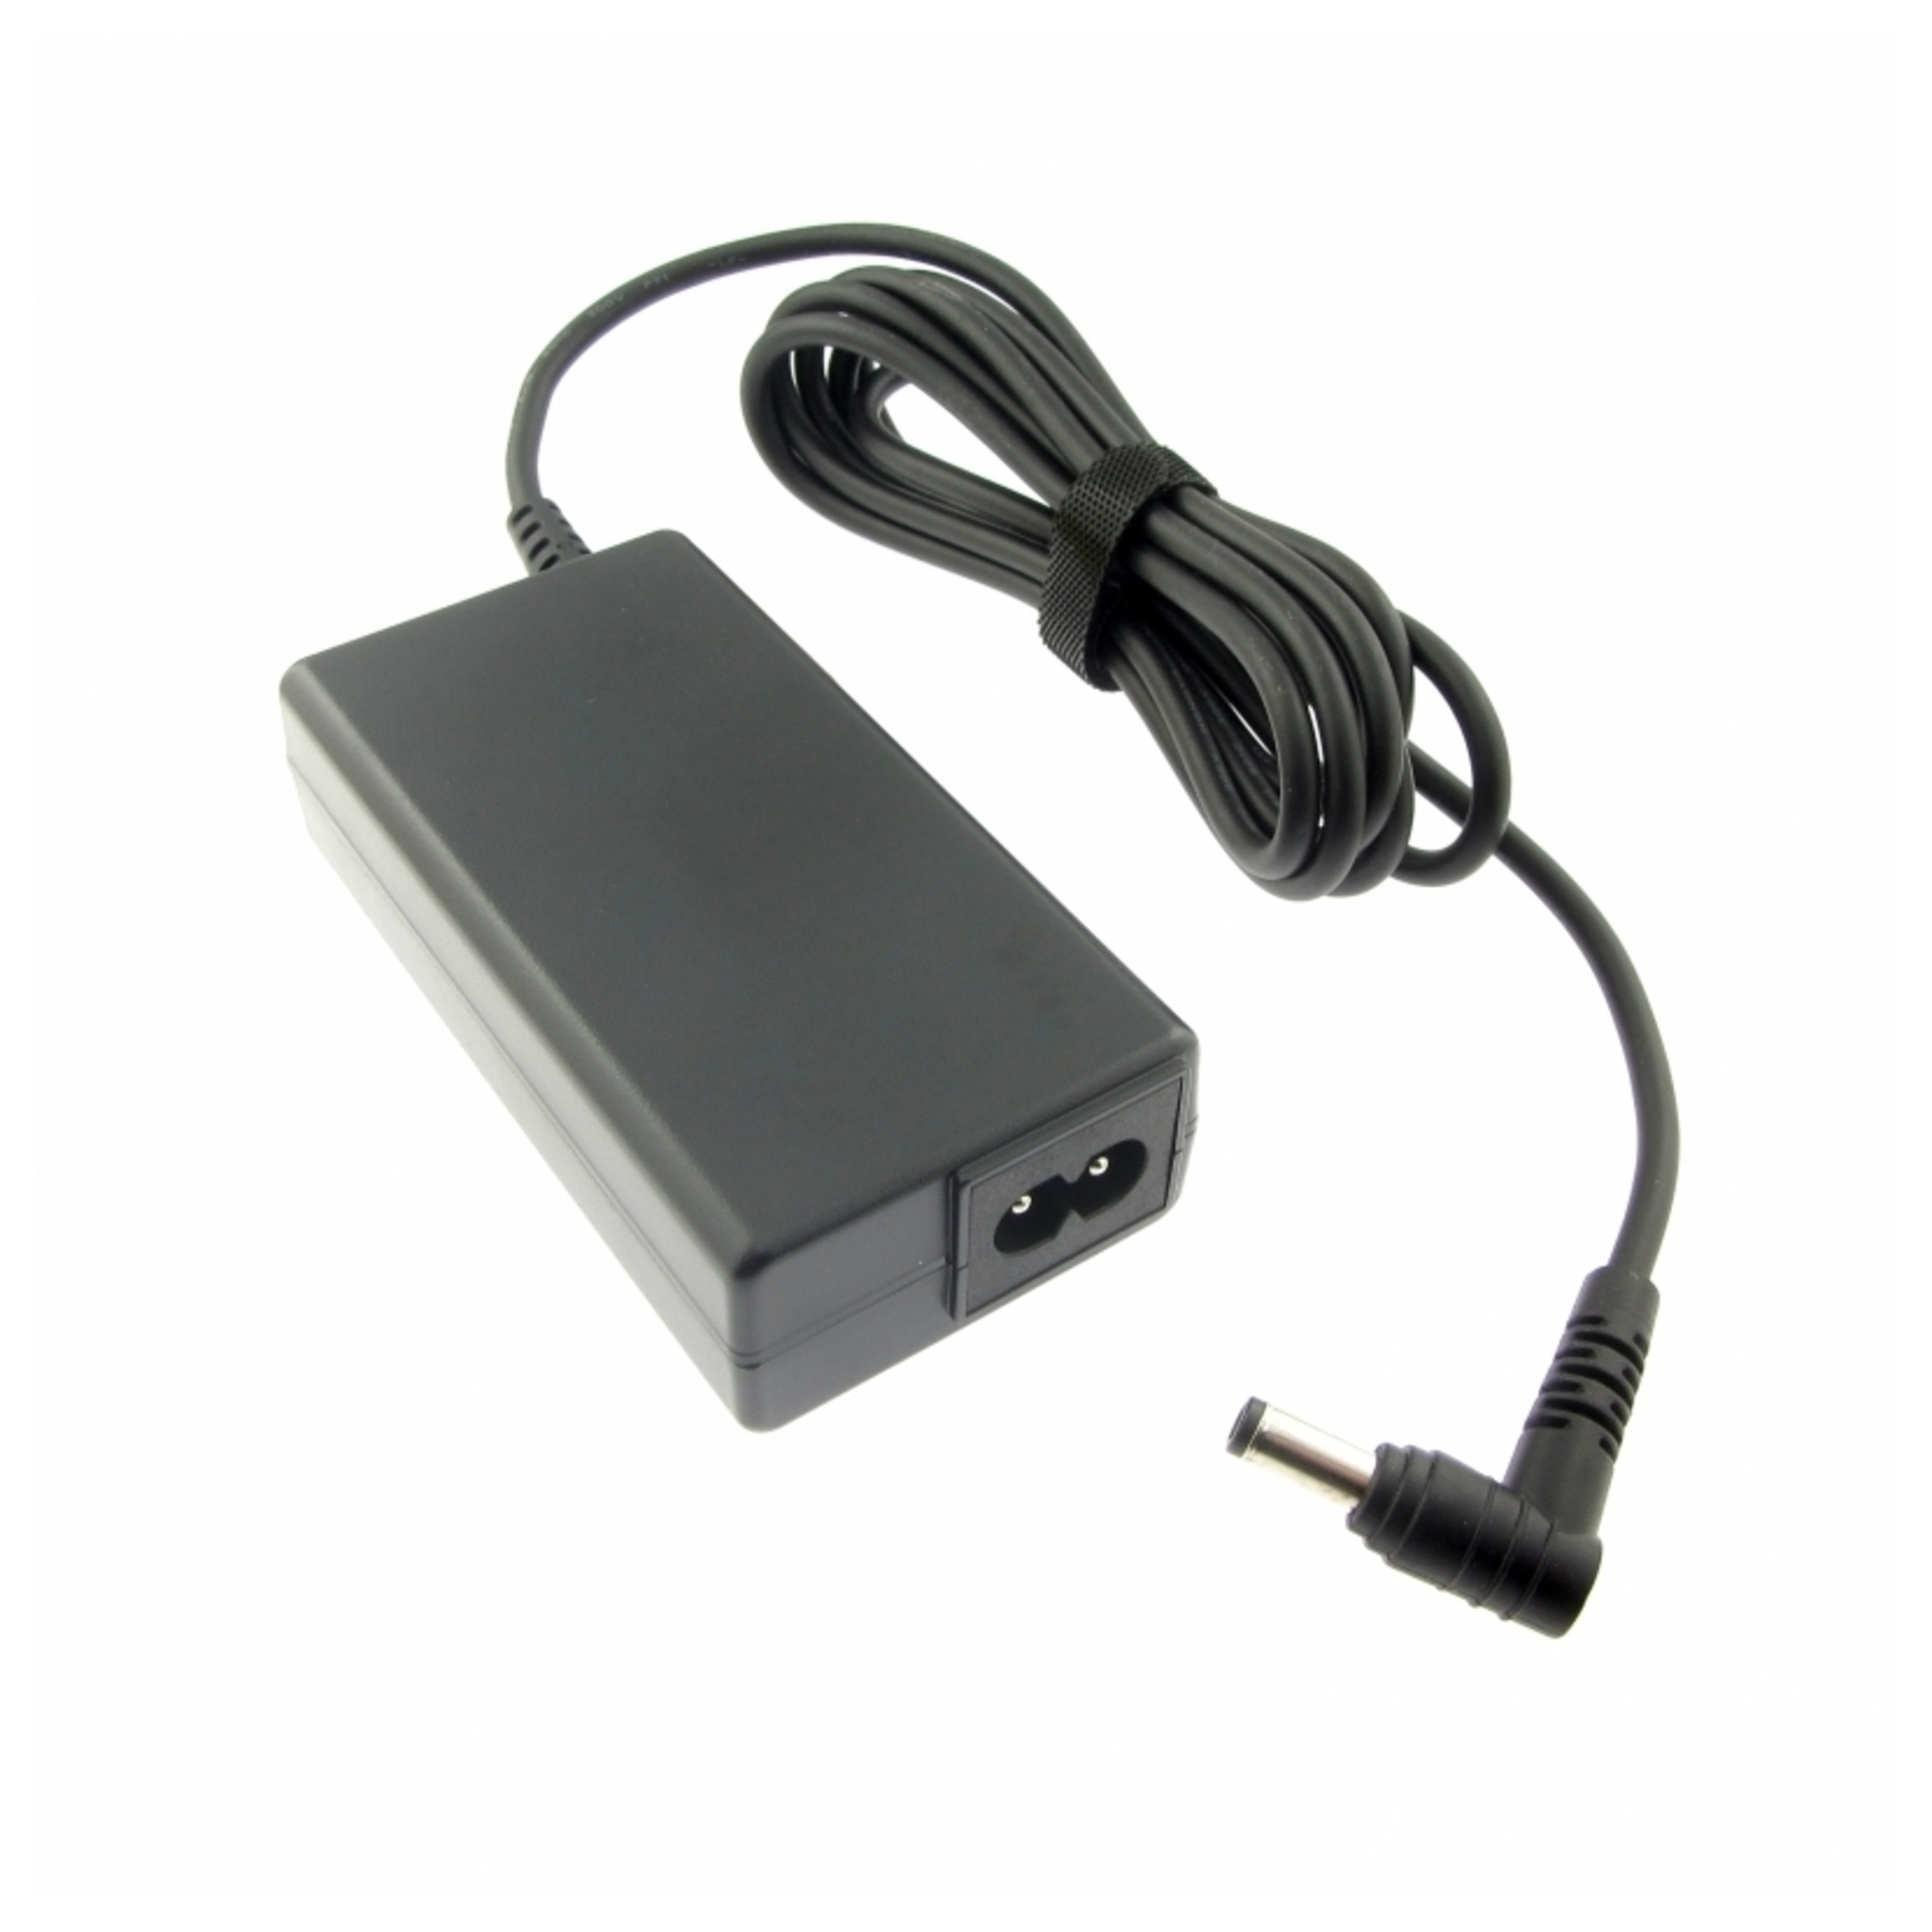 mtxtec charger (power supply), 19v, 3.42a for belinea o.book 4.1, plug 5.5 x 2.5 mm round - neuf